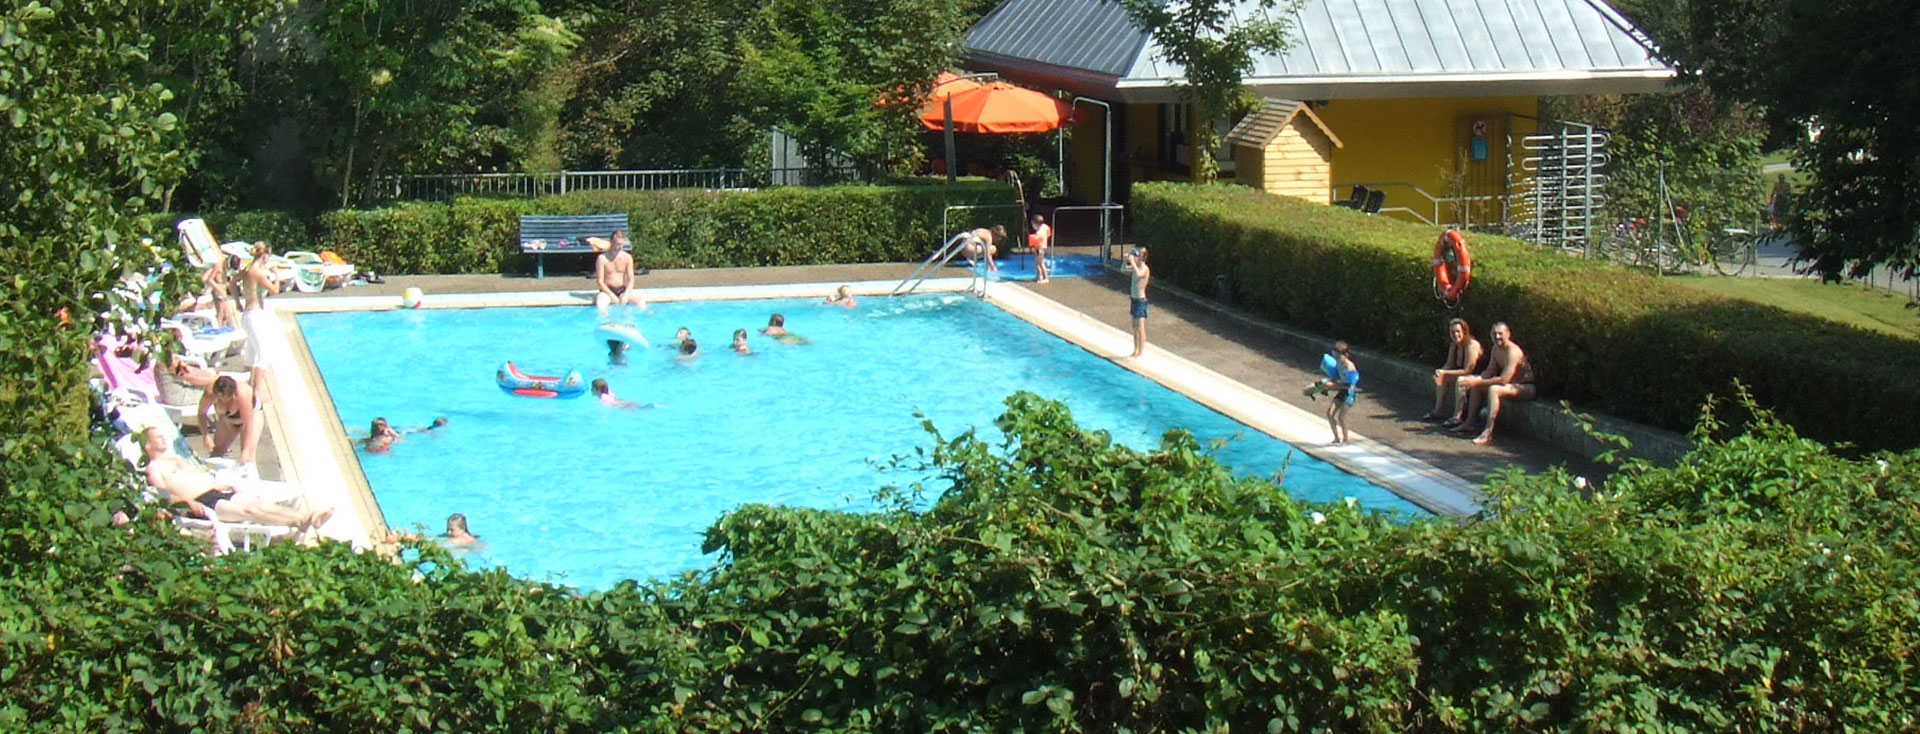 Schwimmbad Odenwald-Camping-Park